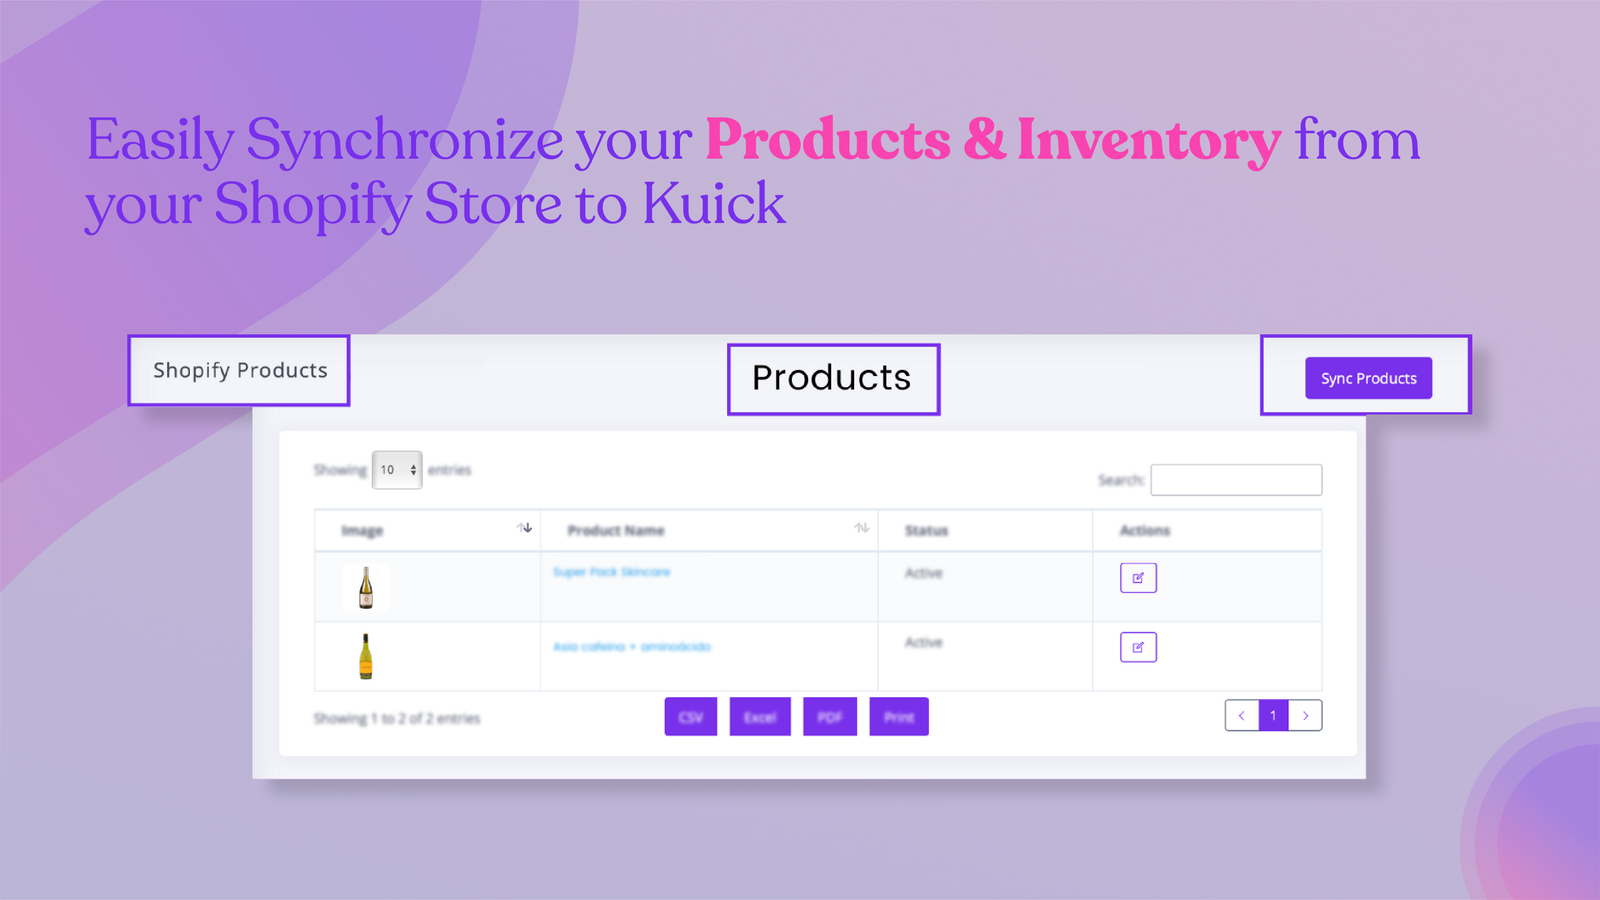 Synchronize your Products & Inventory from Shopify to Kuick